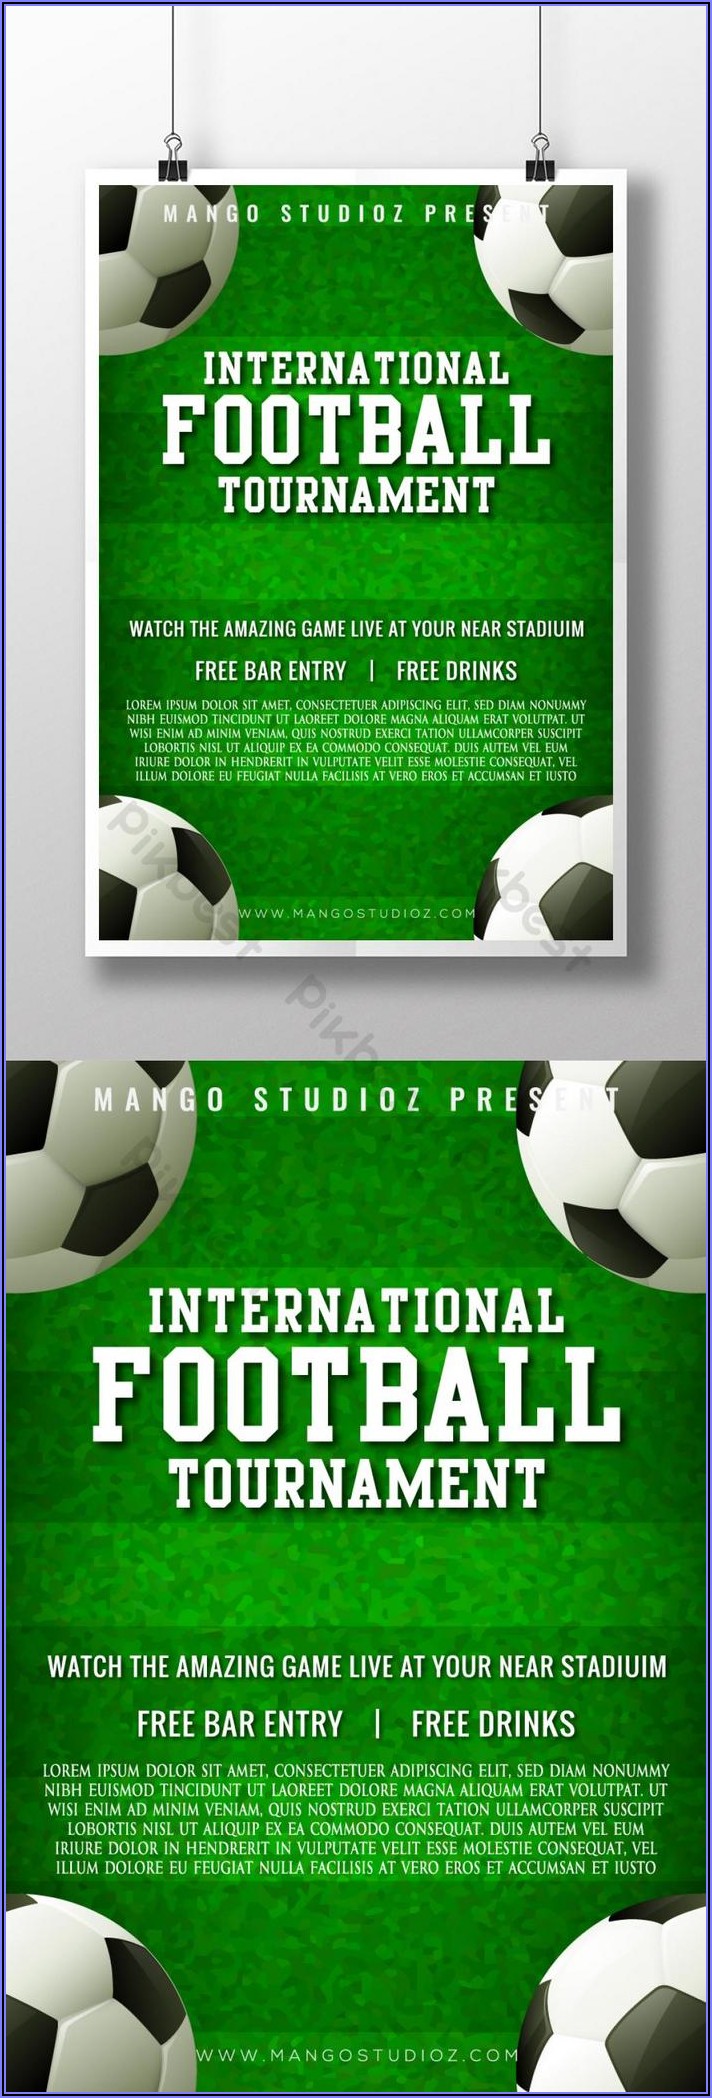 Football Tournament Poster Template Free